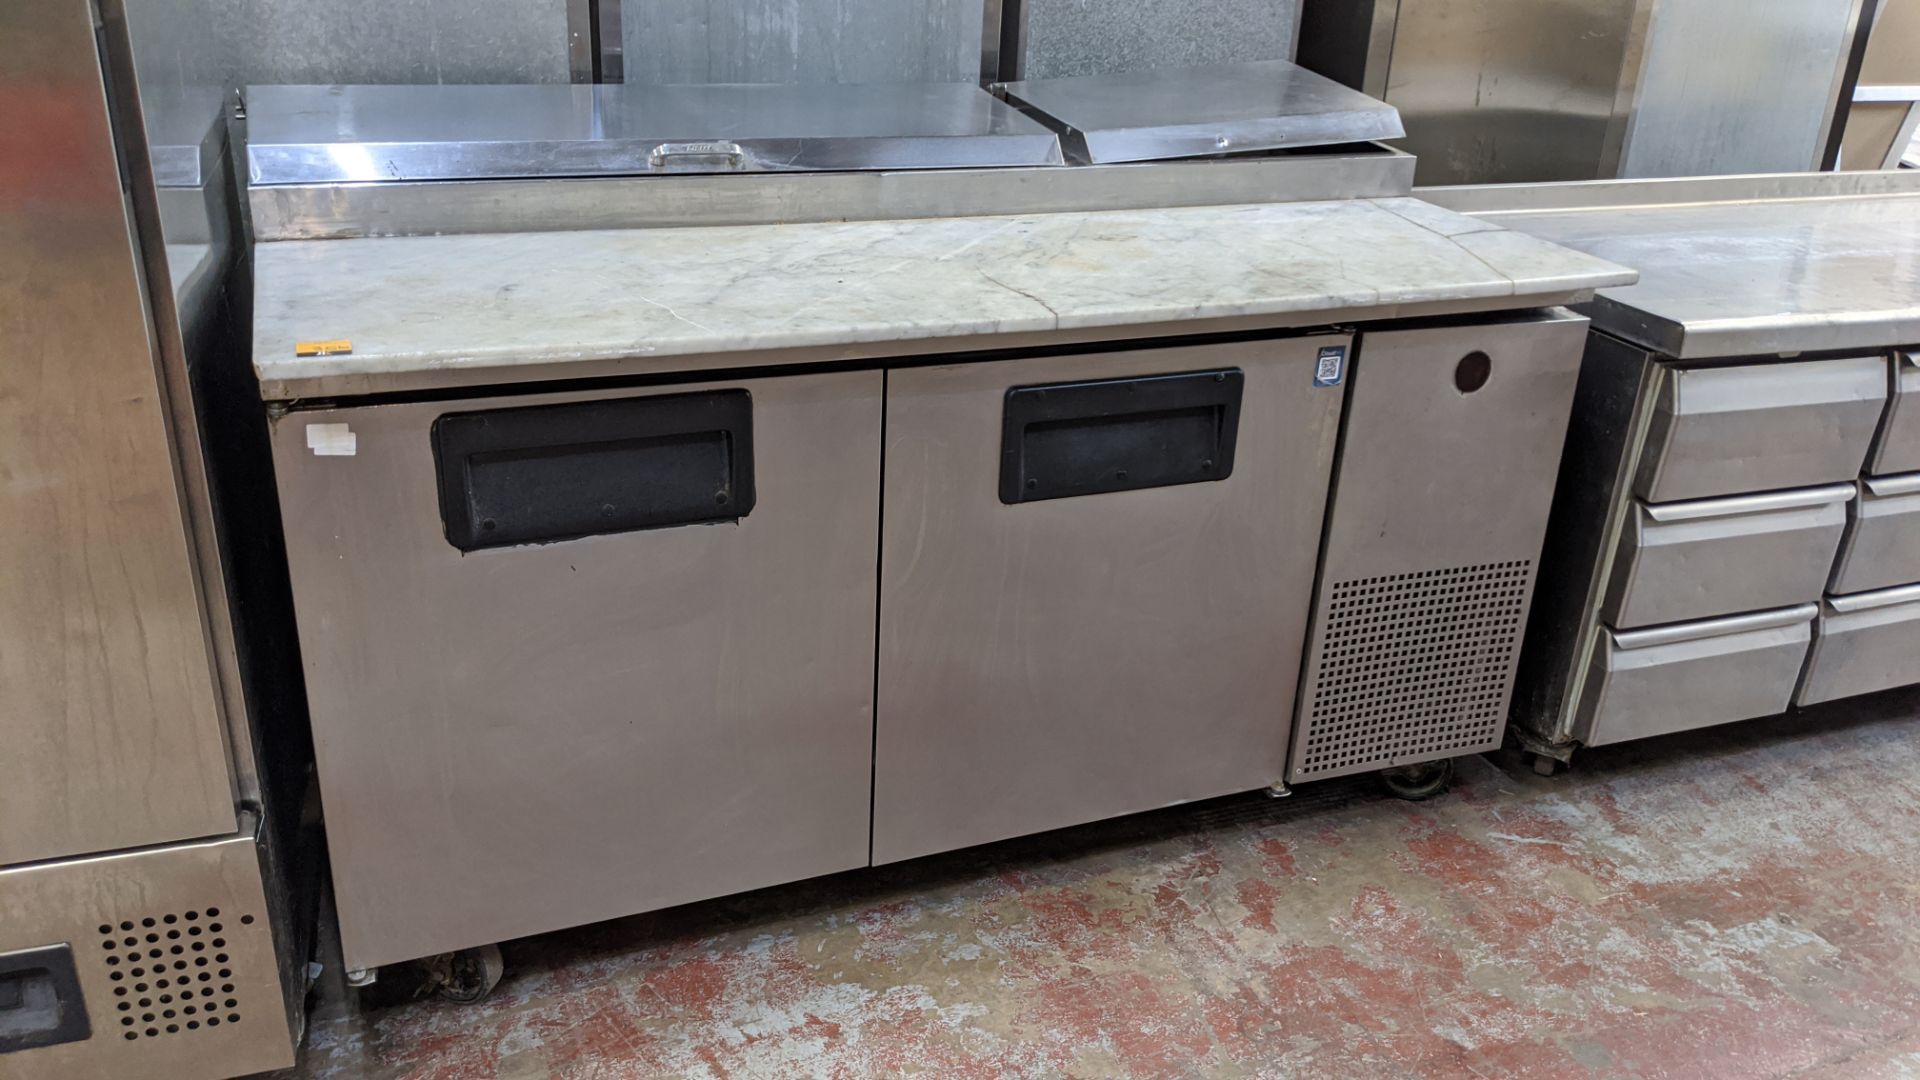 True Refrigeration TPP-67 large twin door stainless steel mobile commercial prep unit with marble ty - Image 2 of 6